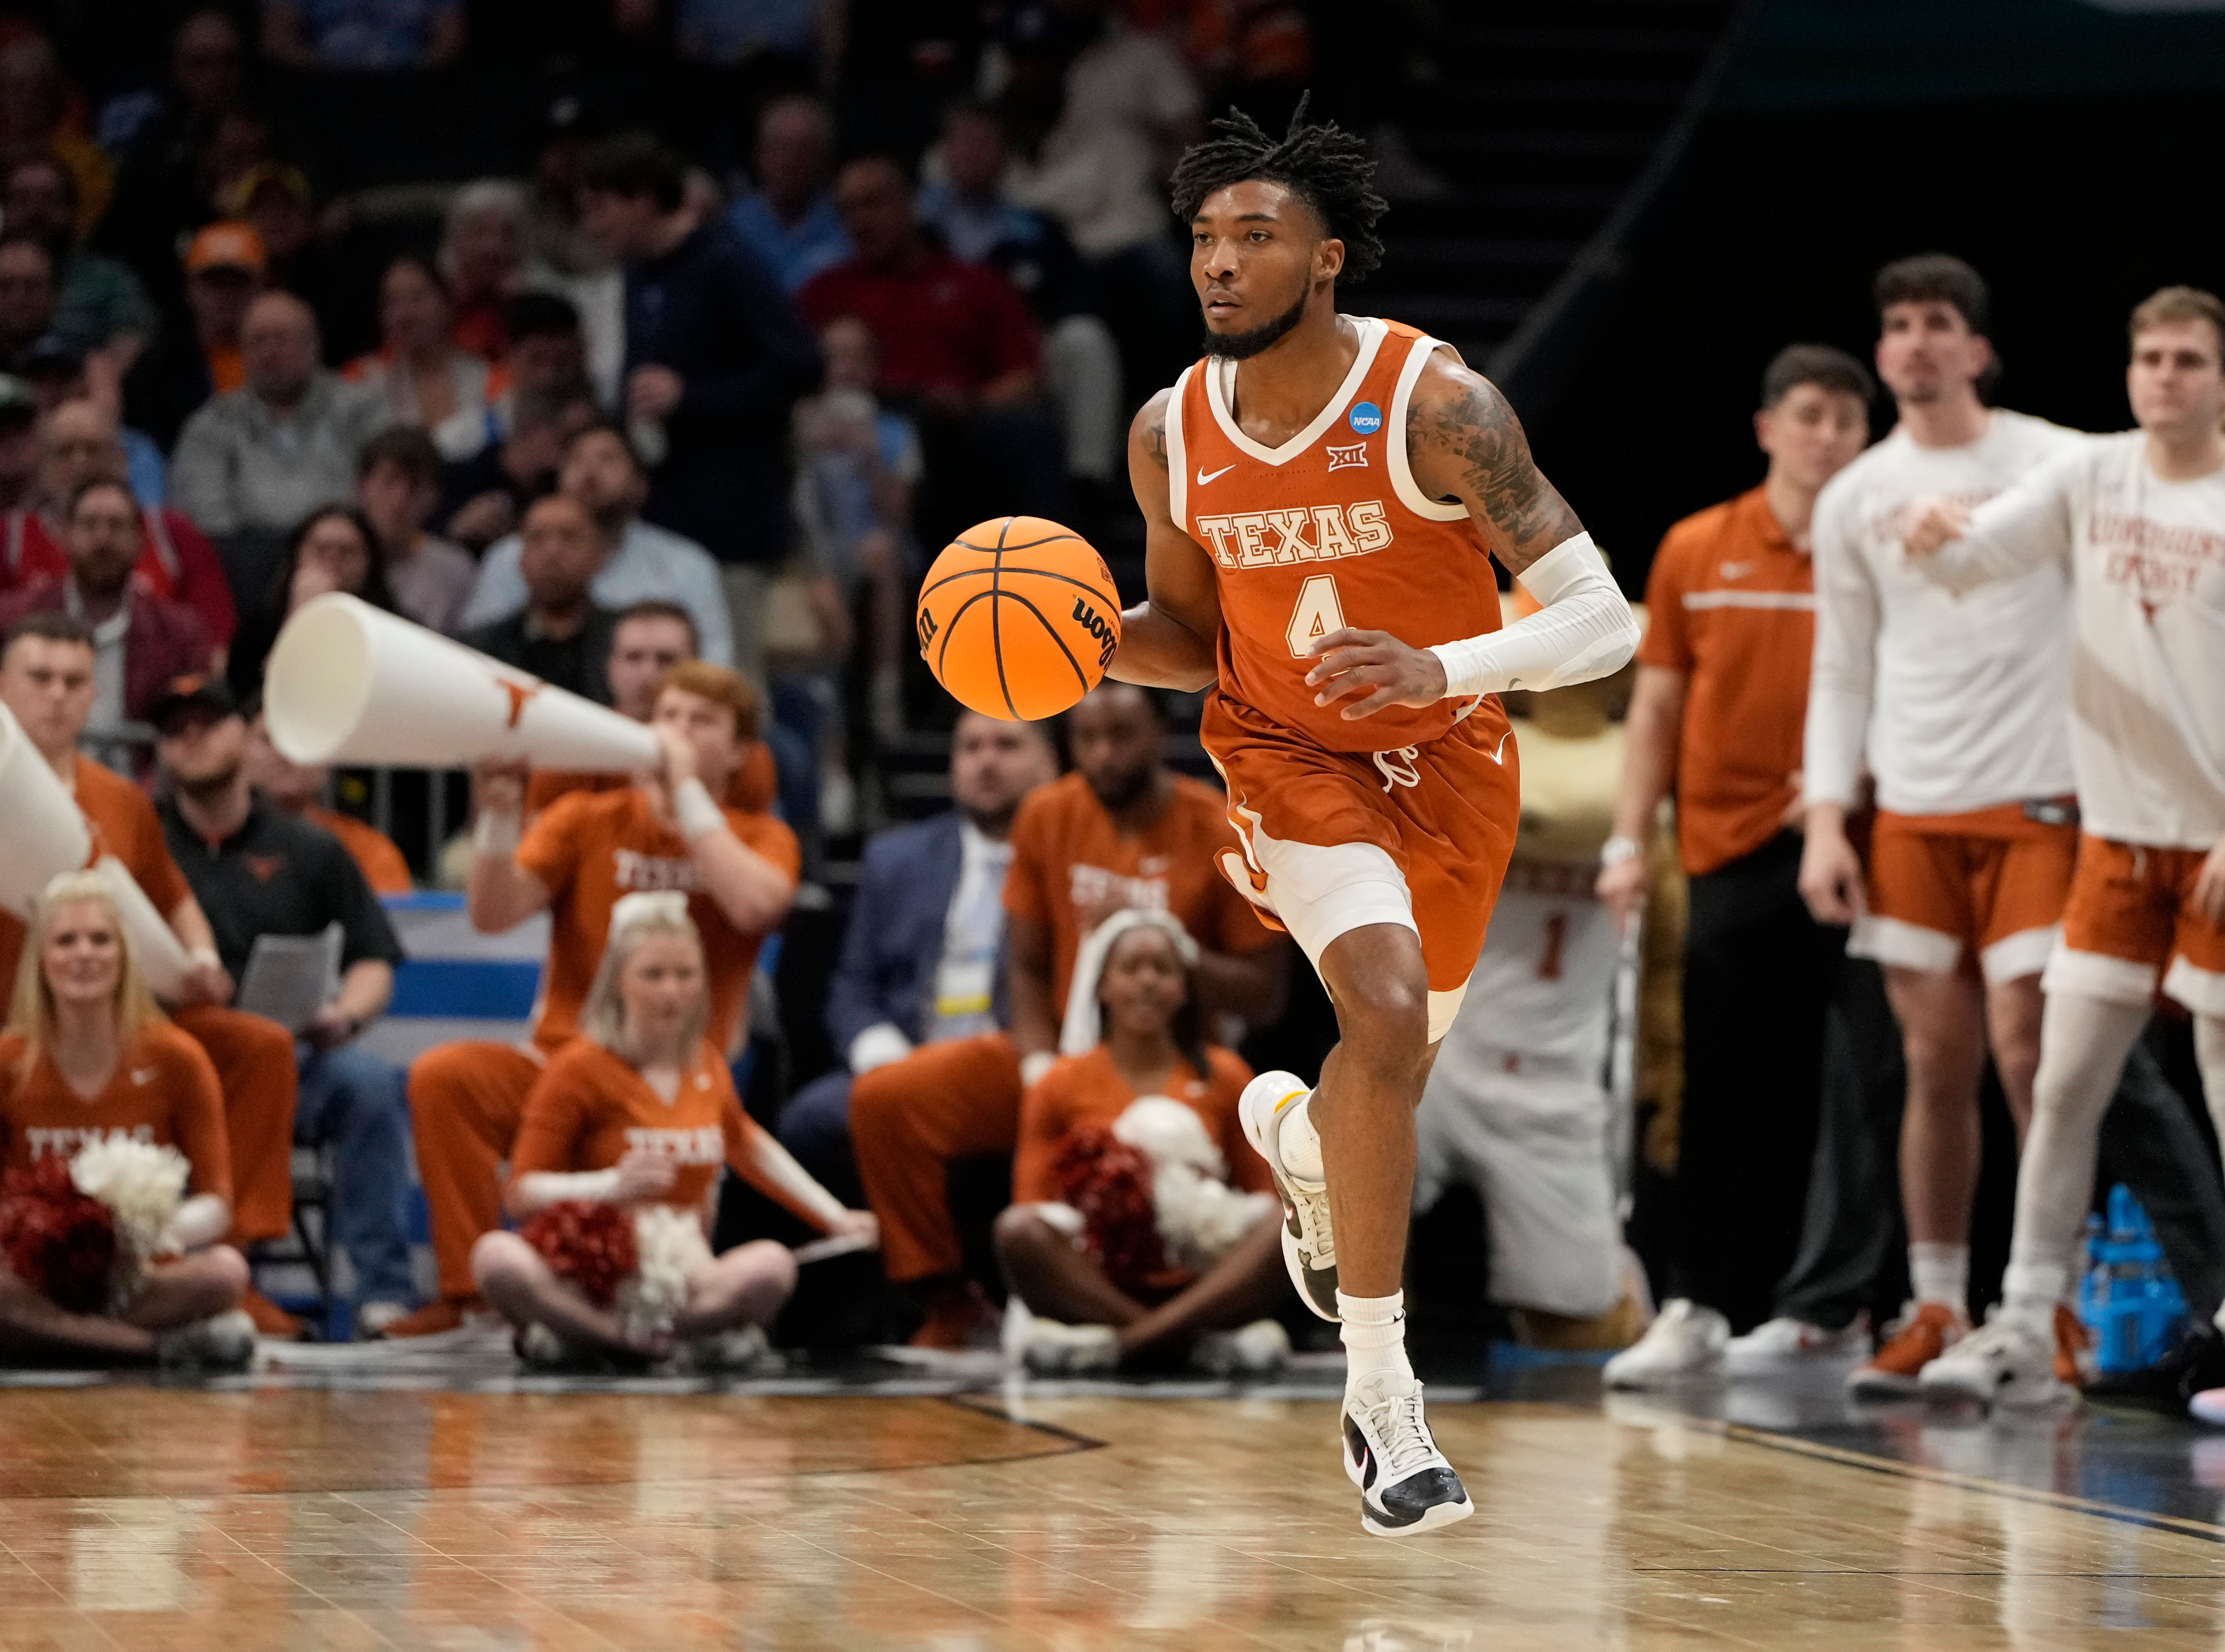 Tyrese Hunter averaged 11.1 points, 2.9 rebounds, 4.1 assists and 1.3 steals for Texas last season.